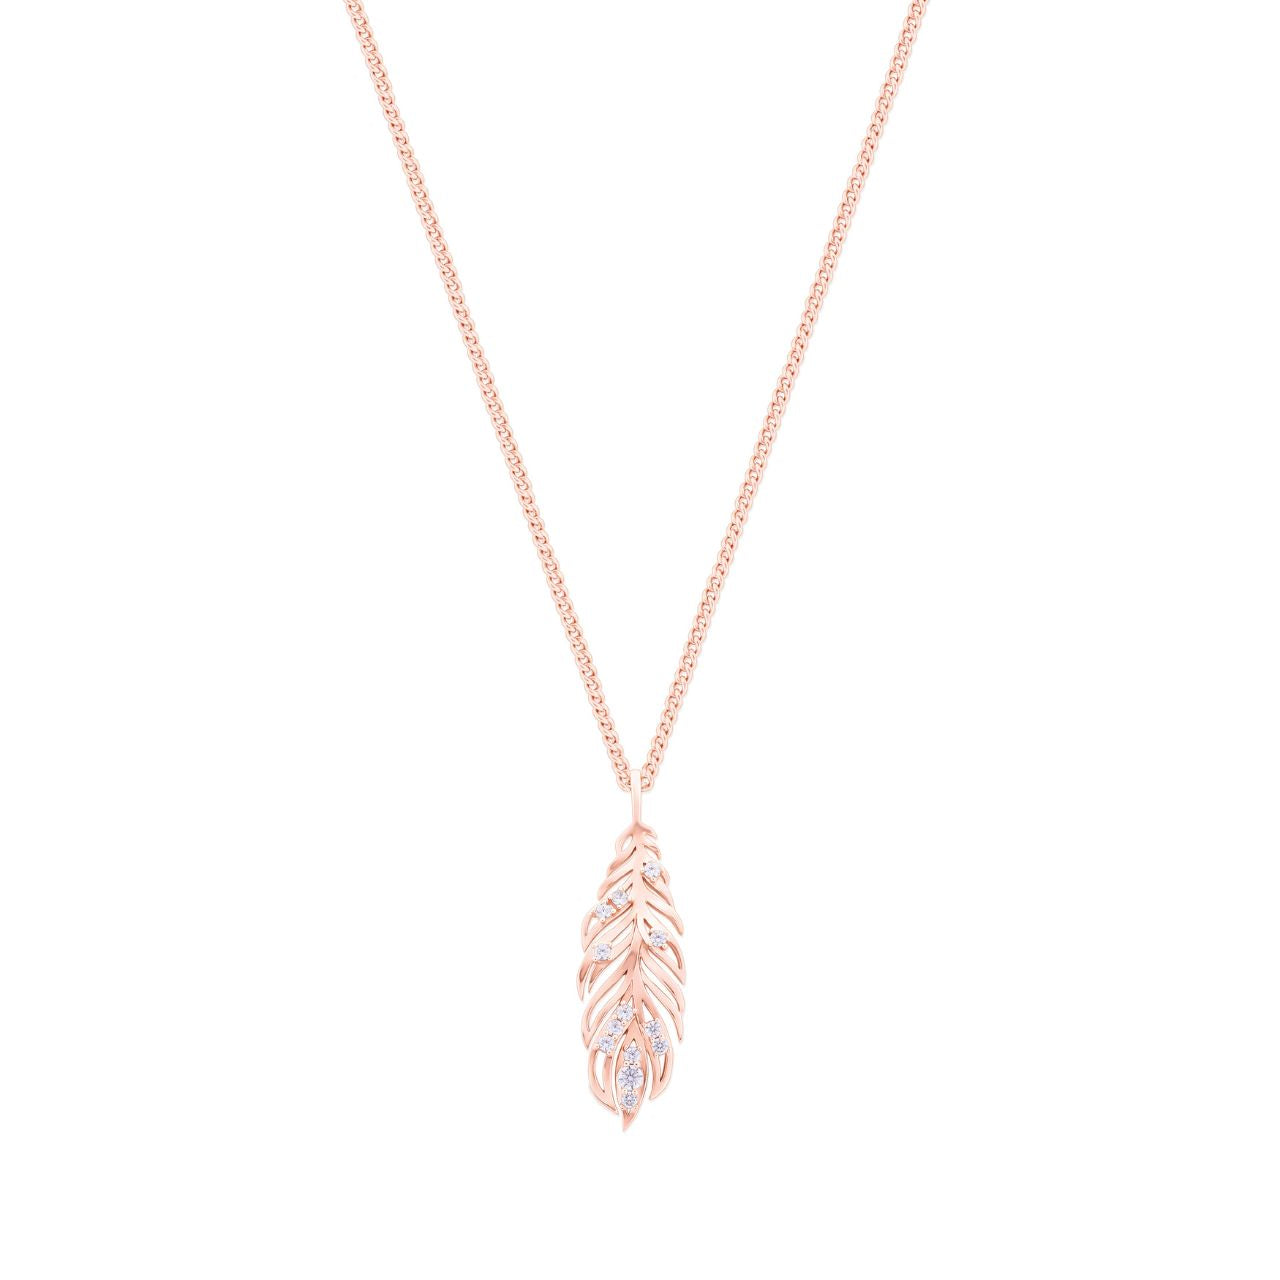 Rose Gold Feather Pendant Inset With Clear CZ by Tipperary  Add a sophisticated touch to your look with this extraordinary Rose Gold Feather Pendant Inset With Clear CZ, created by Tipperary. A beautiful combination of style and quality, the delicate rose gold feather is embellished with a sparkly Clear CZ inlay for added texture and shine.